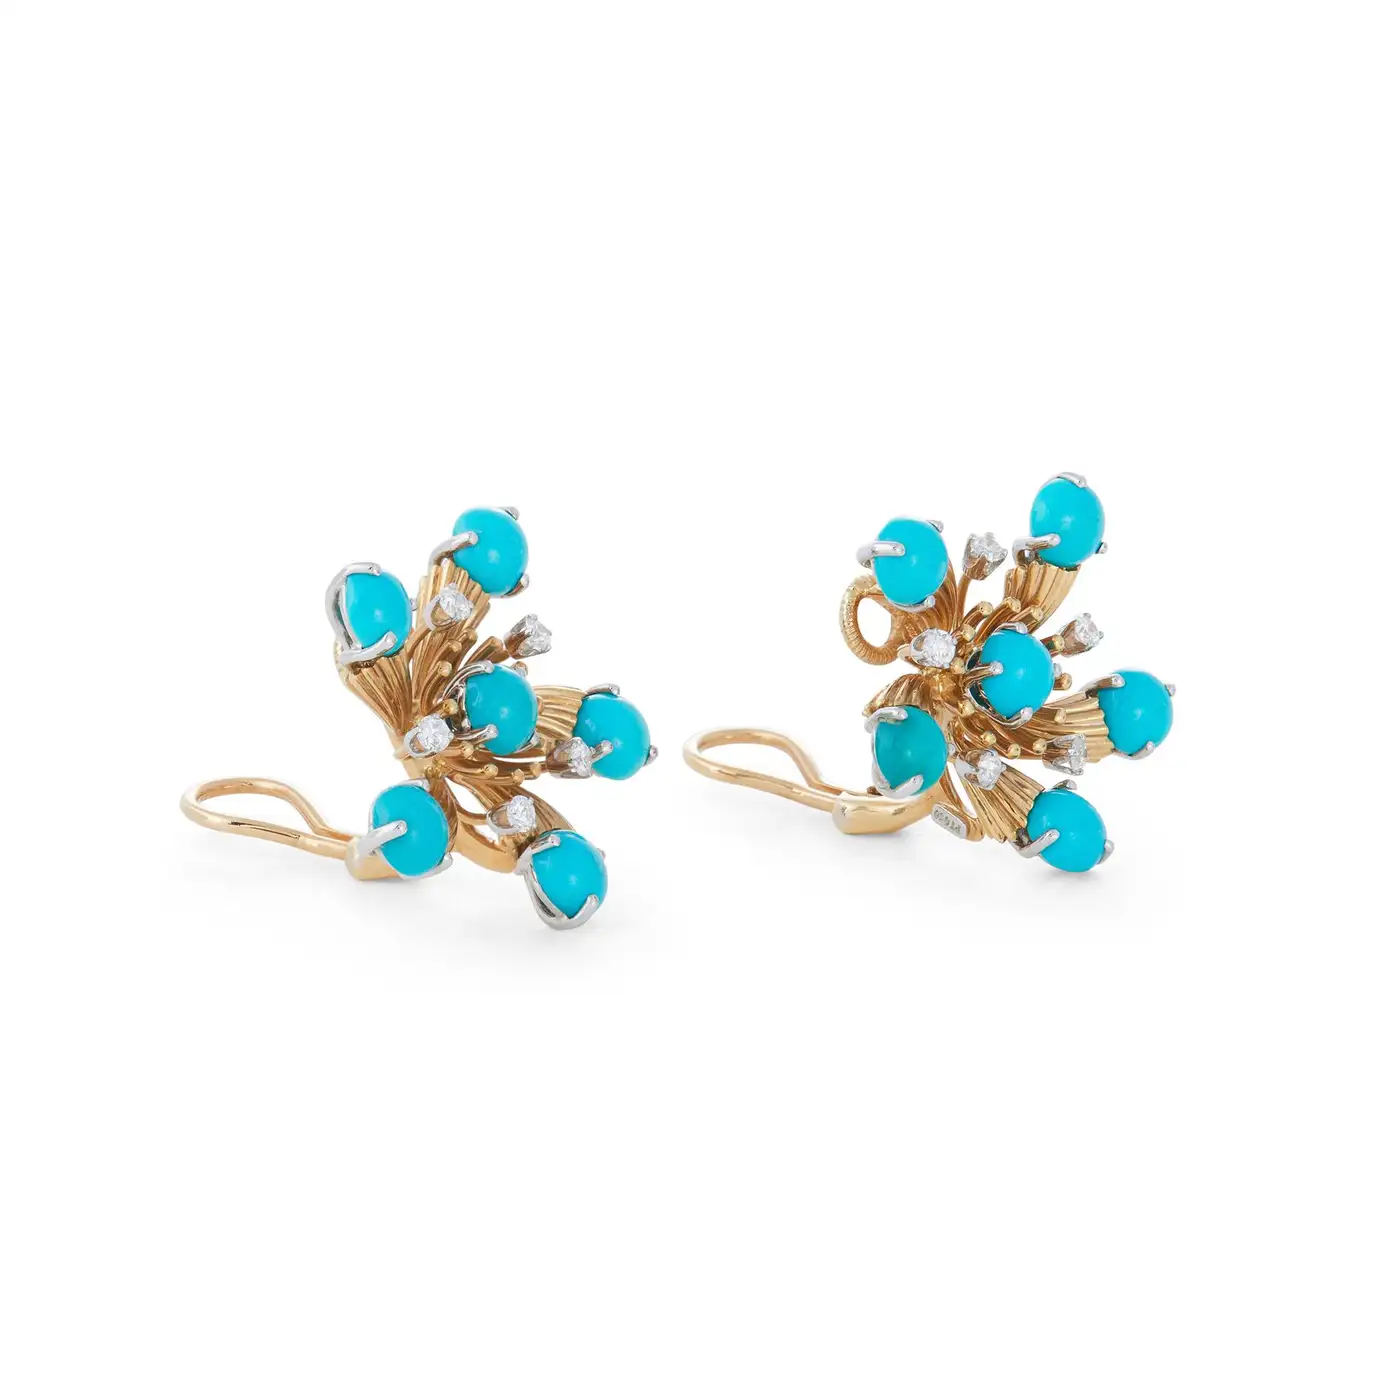 Snowflake-Turquoise-and-Diamond-Ear-Clips-Jean-Schlumberger-for-Tiffany-Co-4.webp